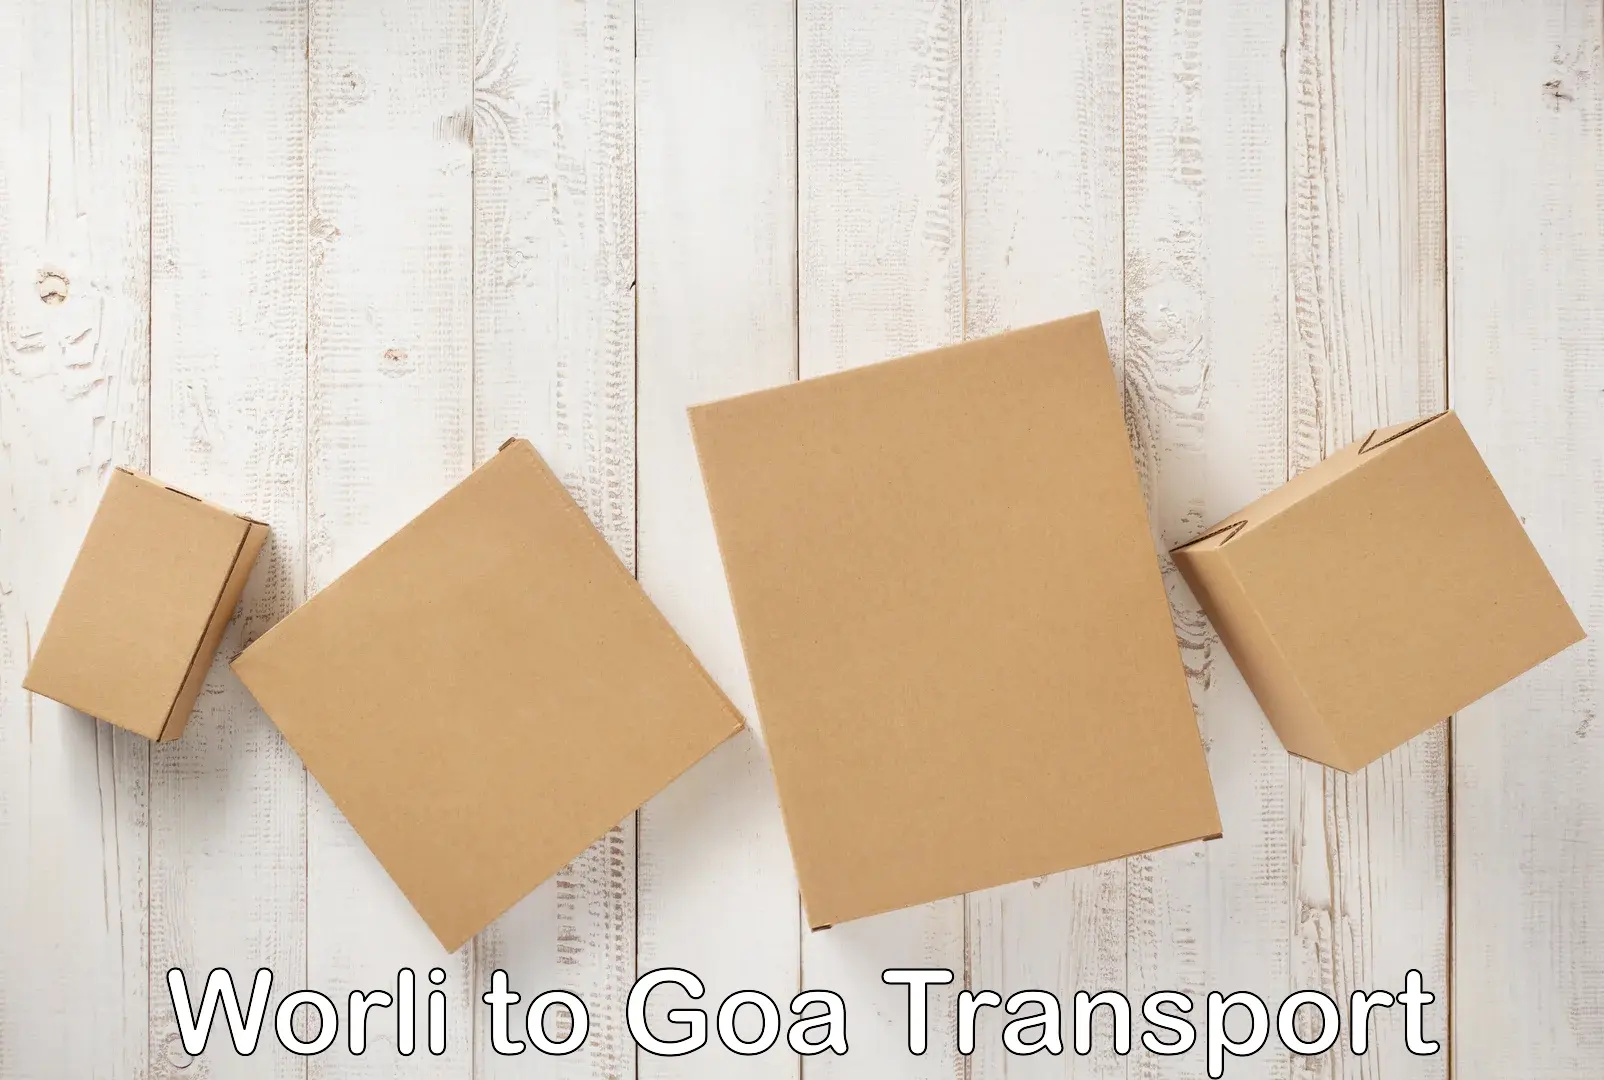 Transport bike from one state to another Worli to Goa University